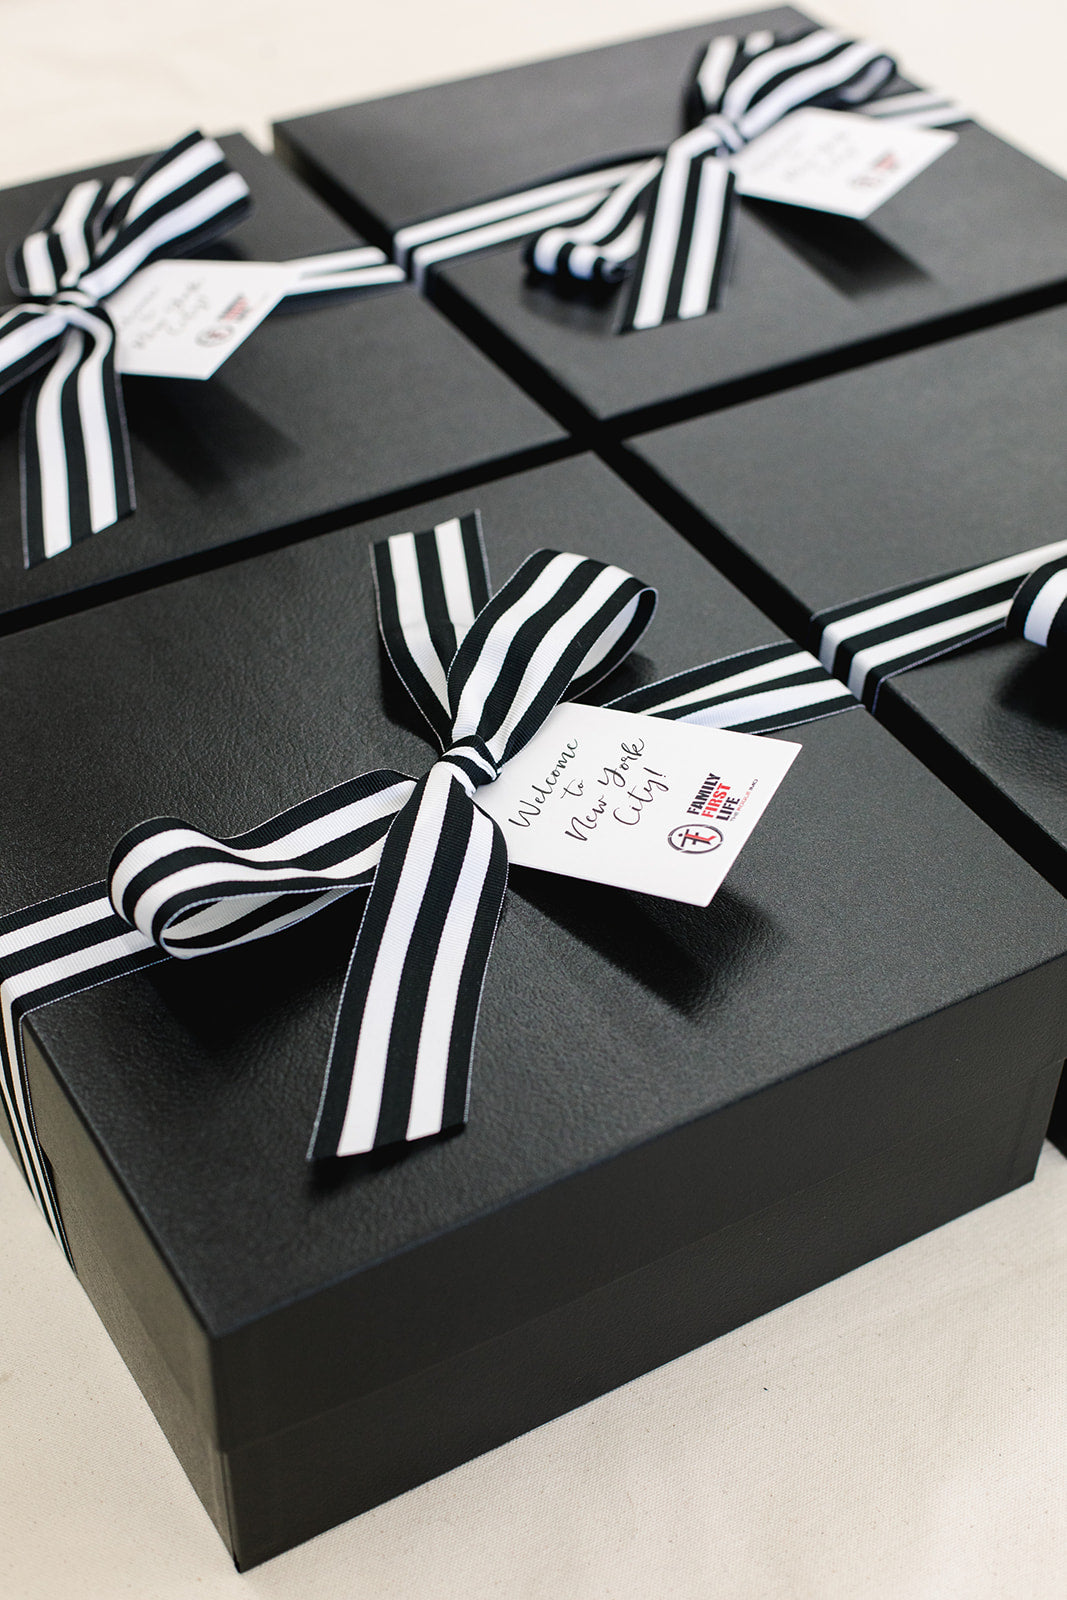 Gallery New York City Themed Corporate Gift Boxes